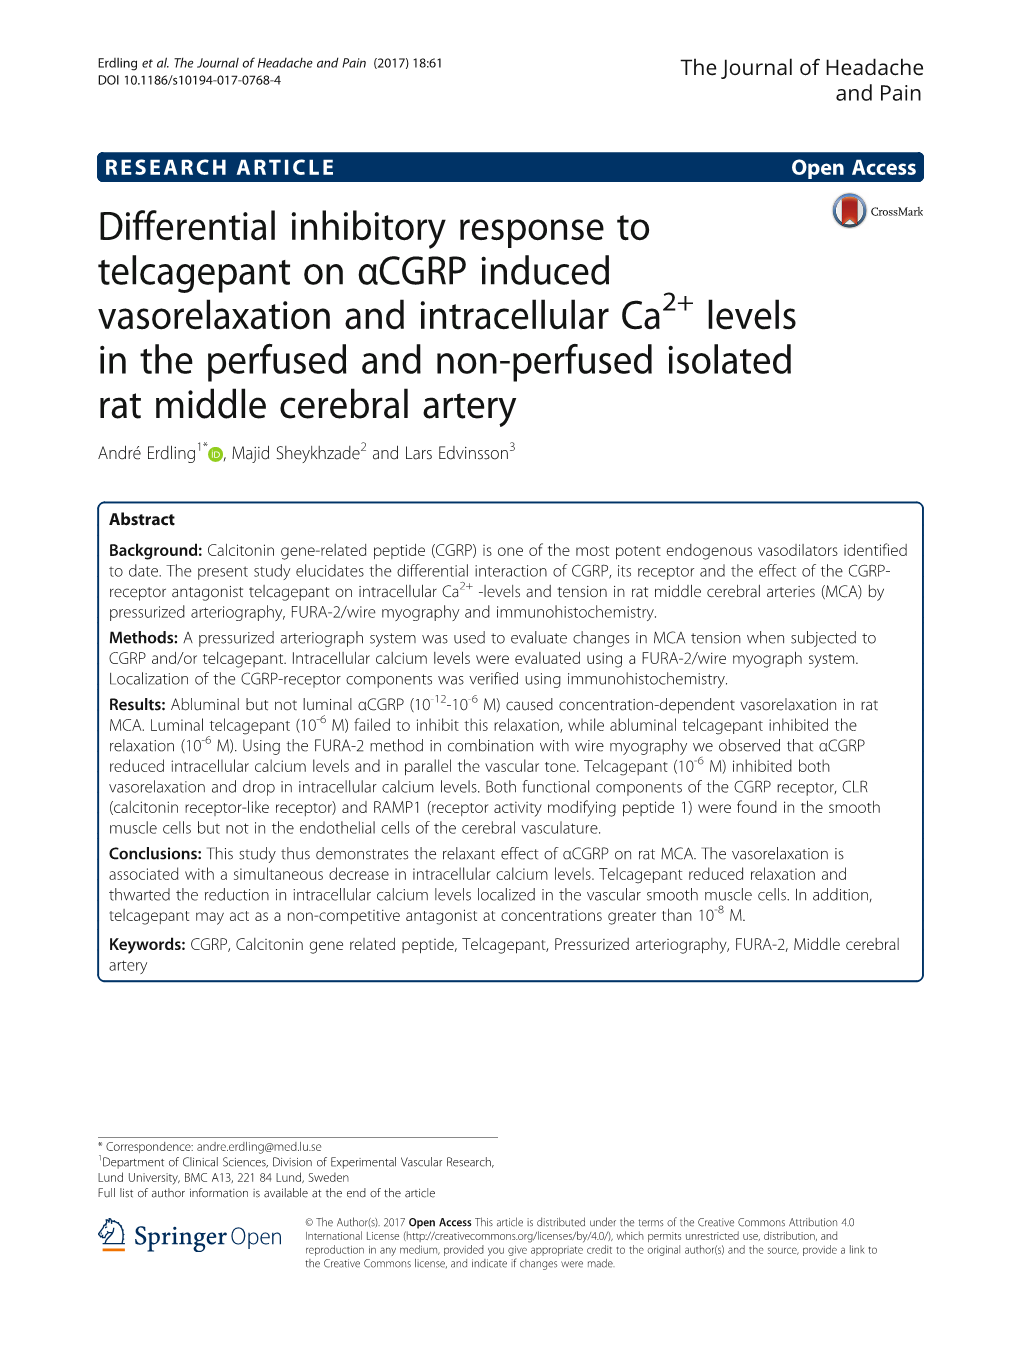 Differential Inhibitory Response to Telcagepant on Αcgrp Induced